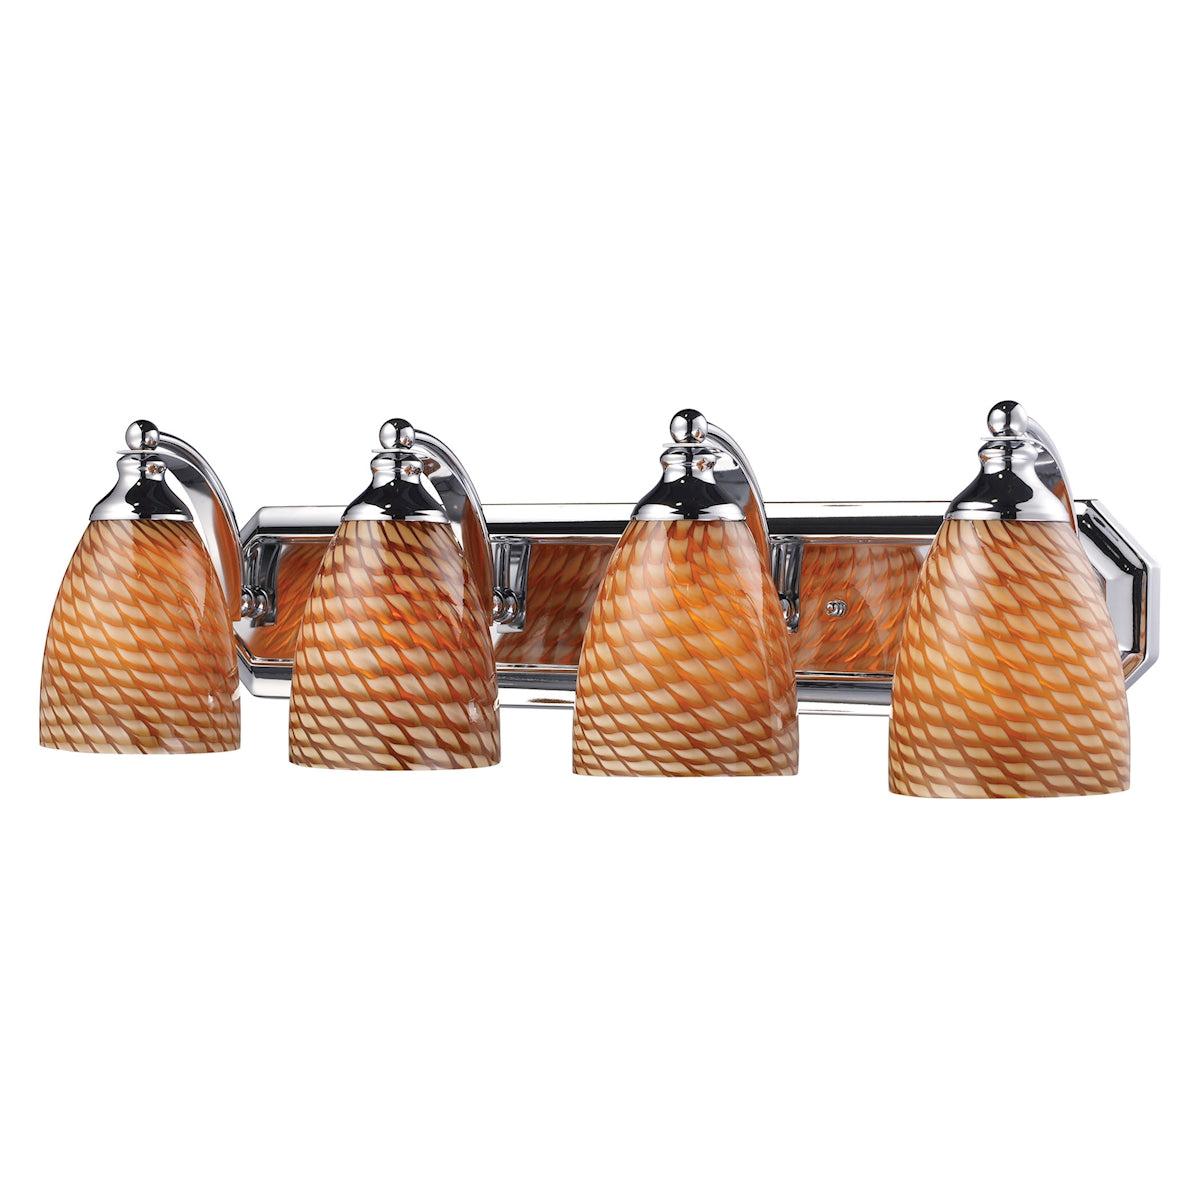 ELK Lighting 570-4C-C Mix and Match Vanity 4-Light Wall Lamp in Chrome with Cocoa Glass